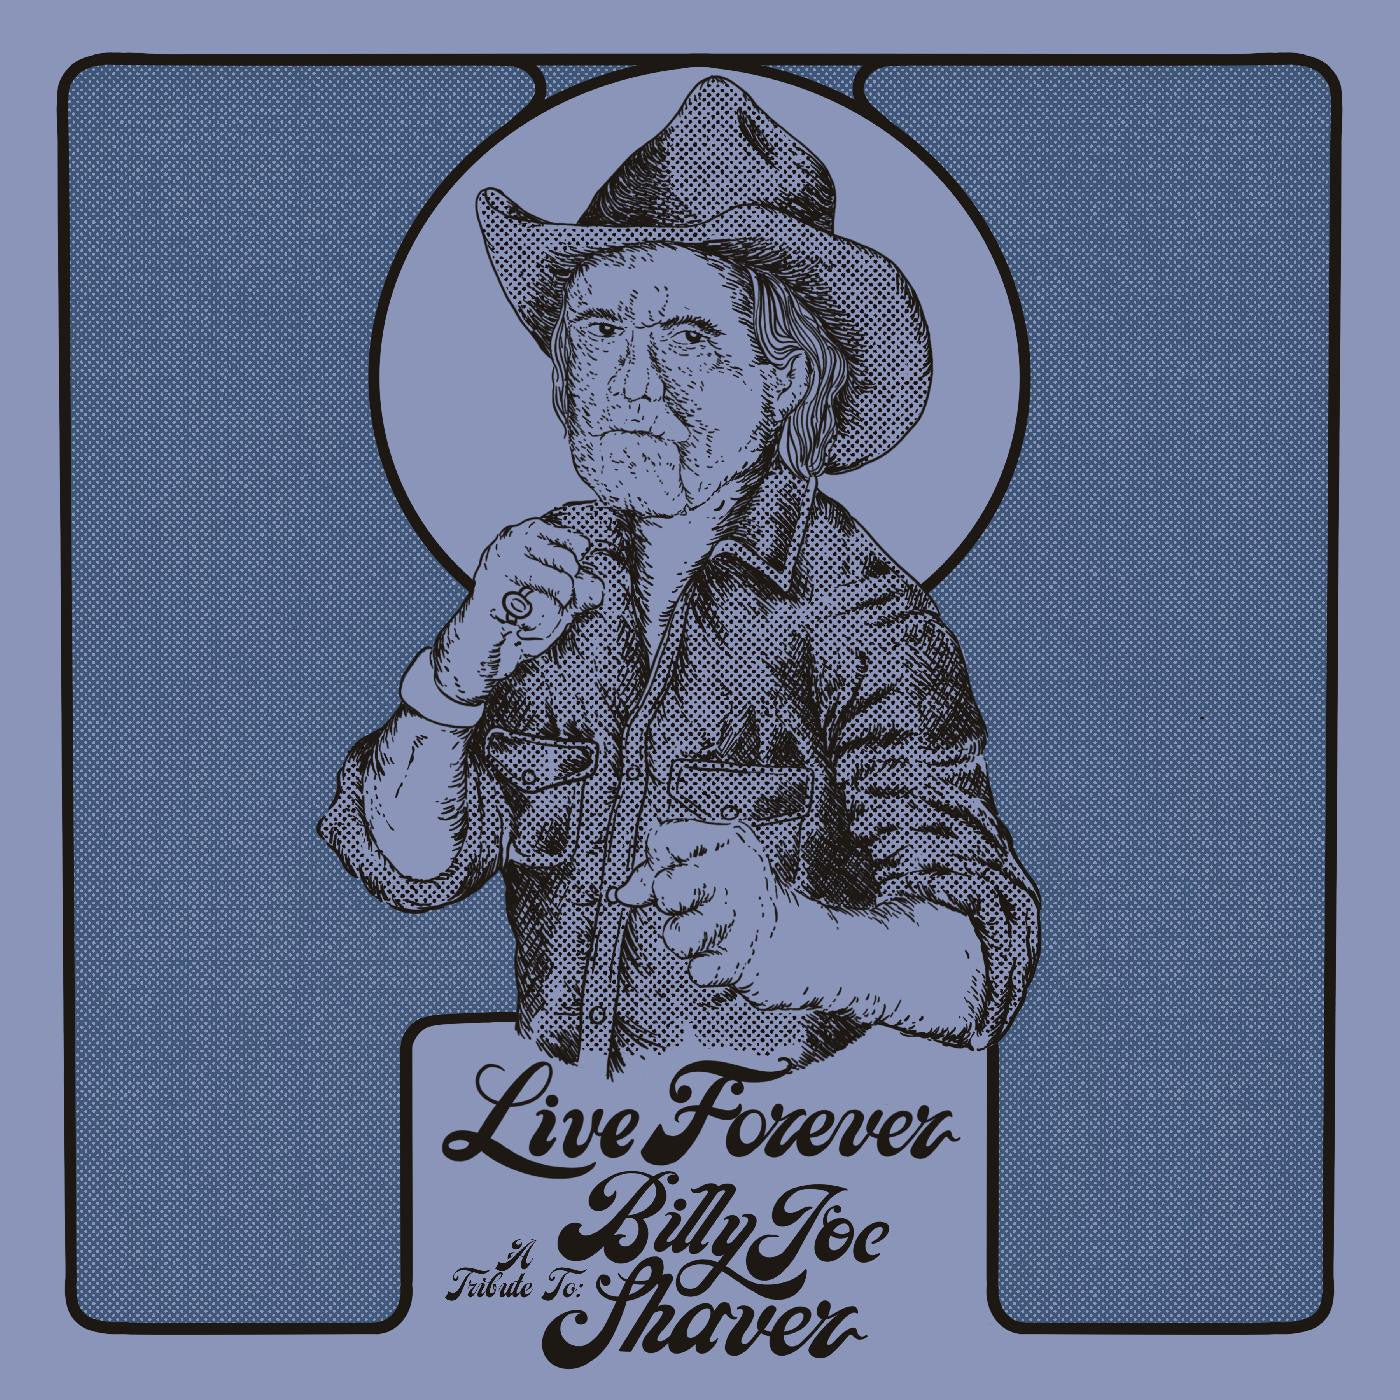 Various Artists - Live Forever: A Tribute to Billy Joe Shaver (Vinyl LP)